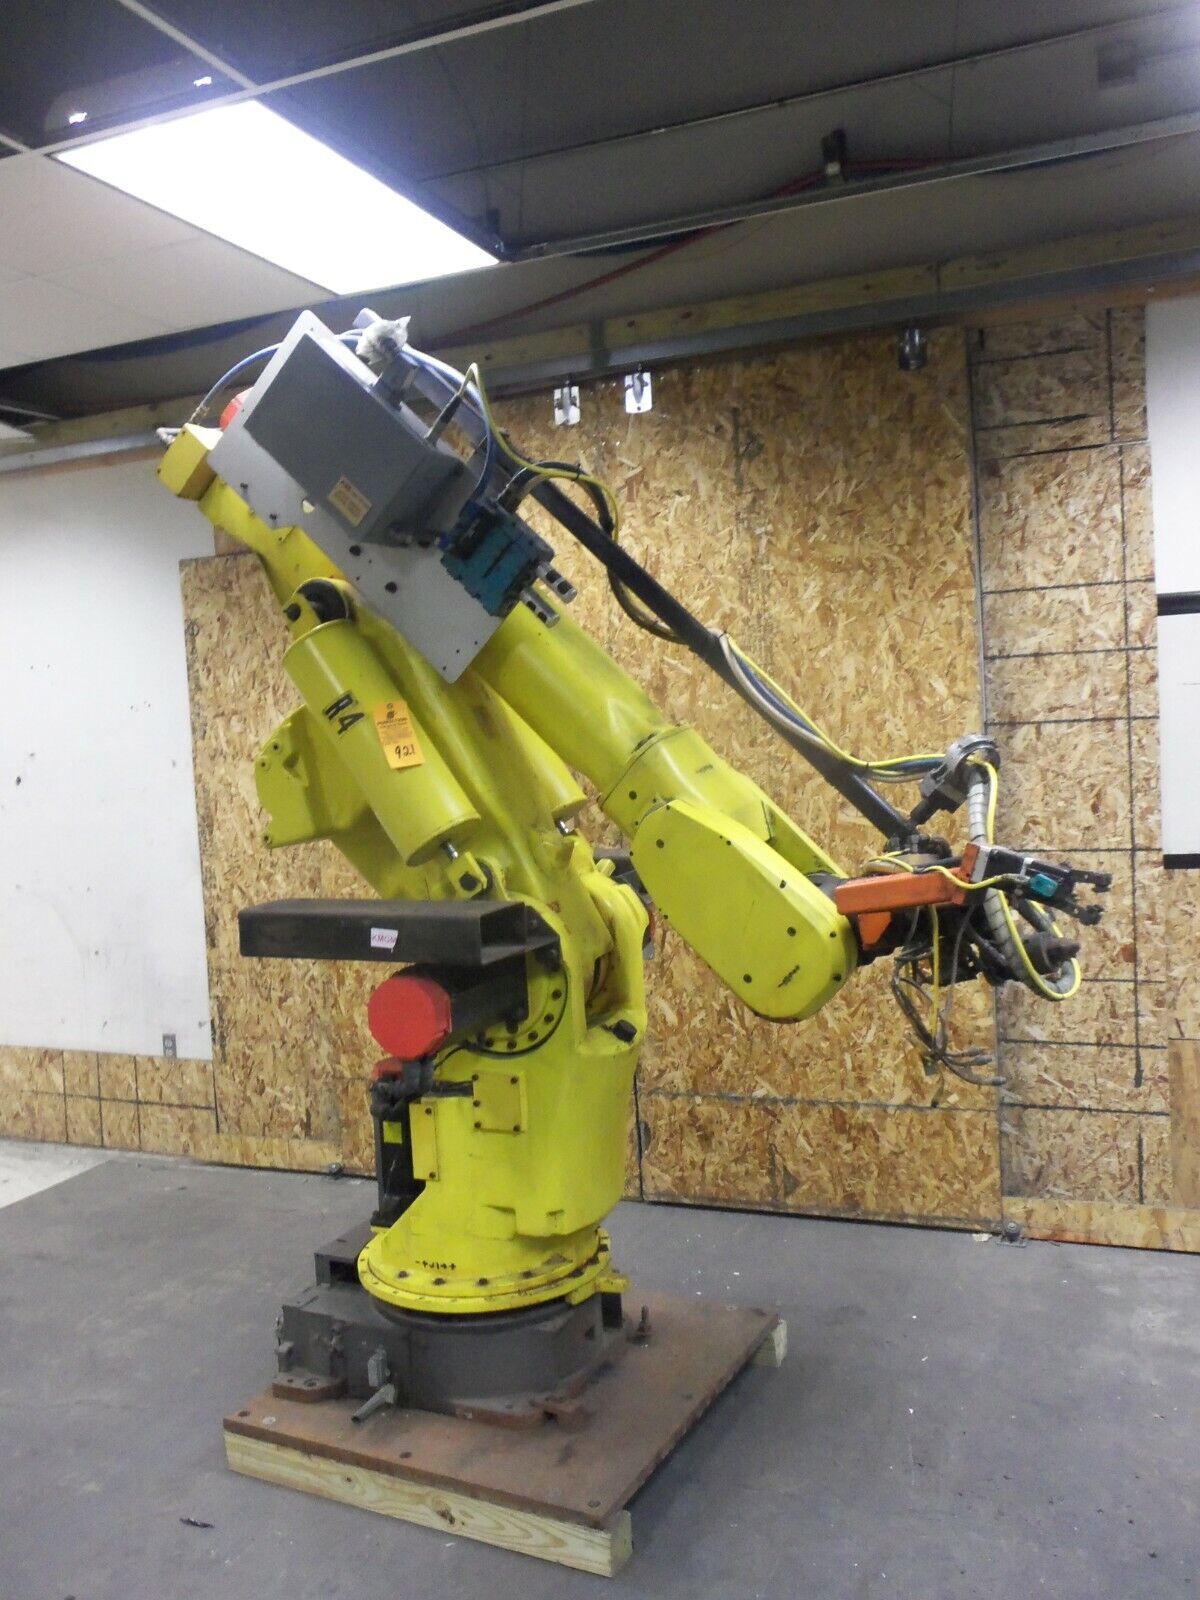 Fanuc Robot S-420 I W A05B-1313-B503 F-34487 Robotic Arm With Welding Attachment